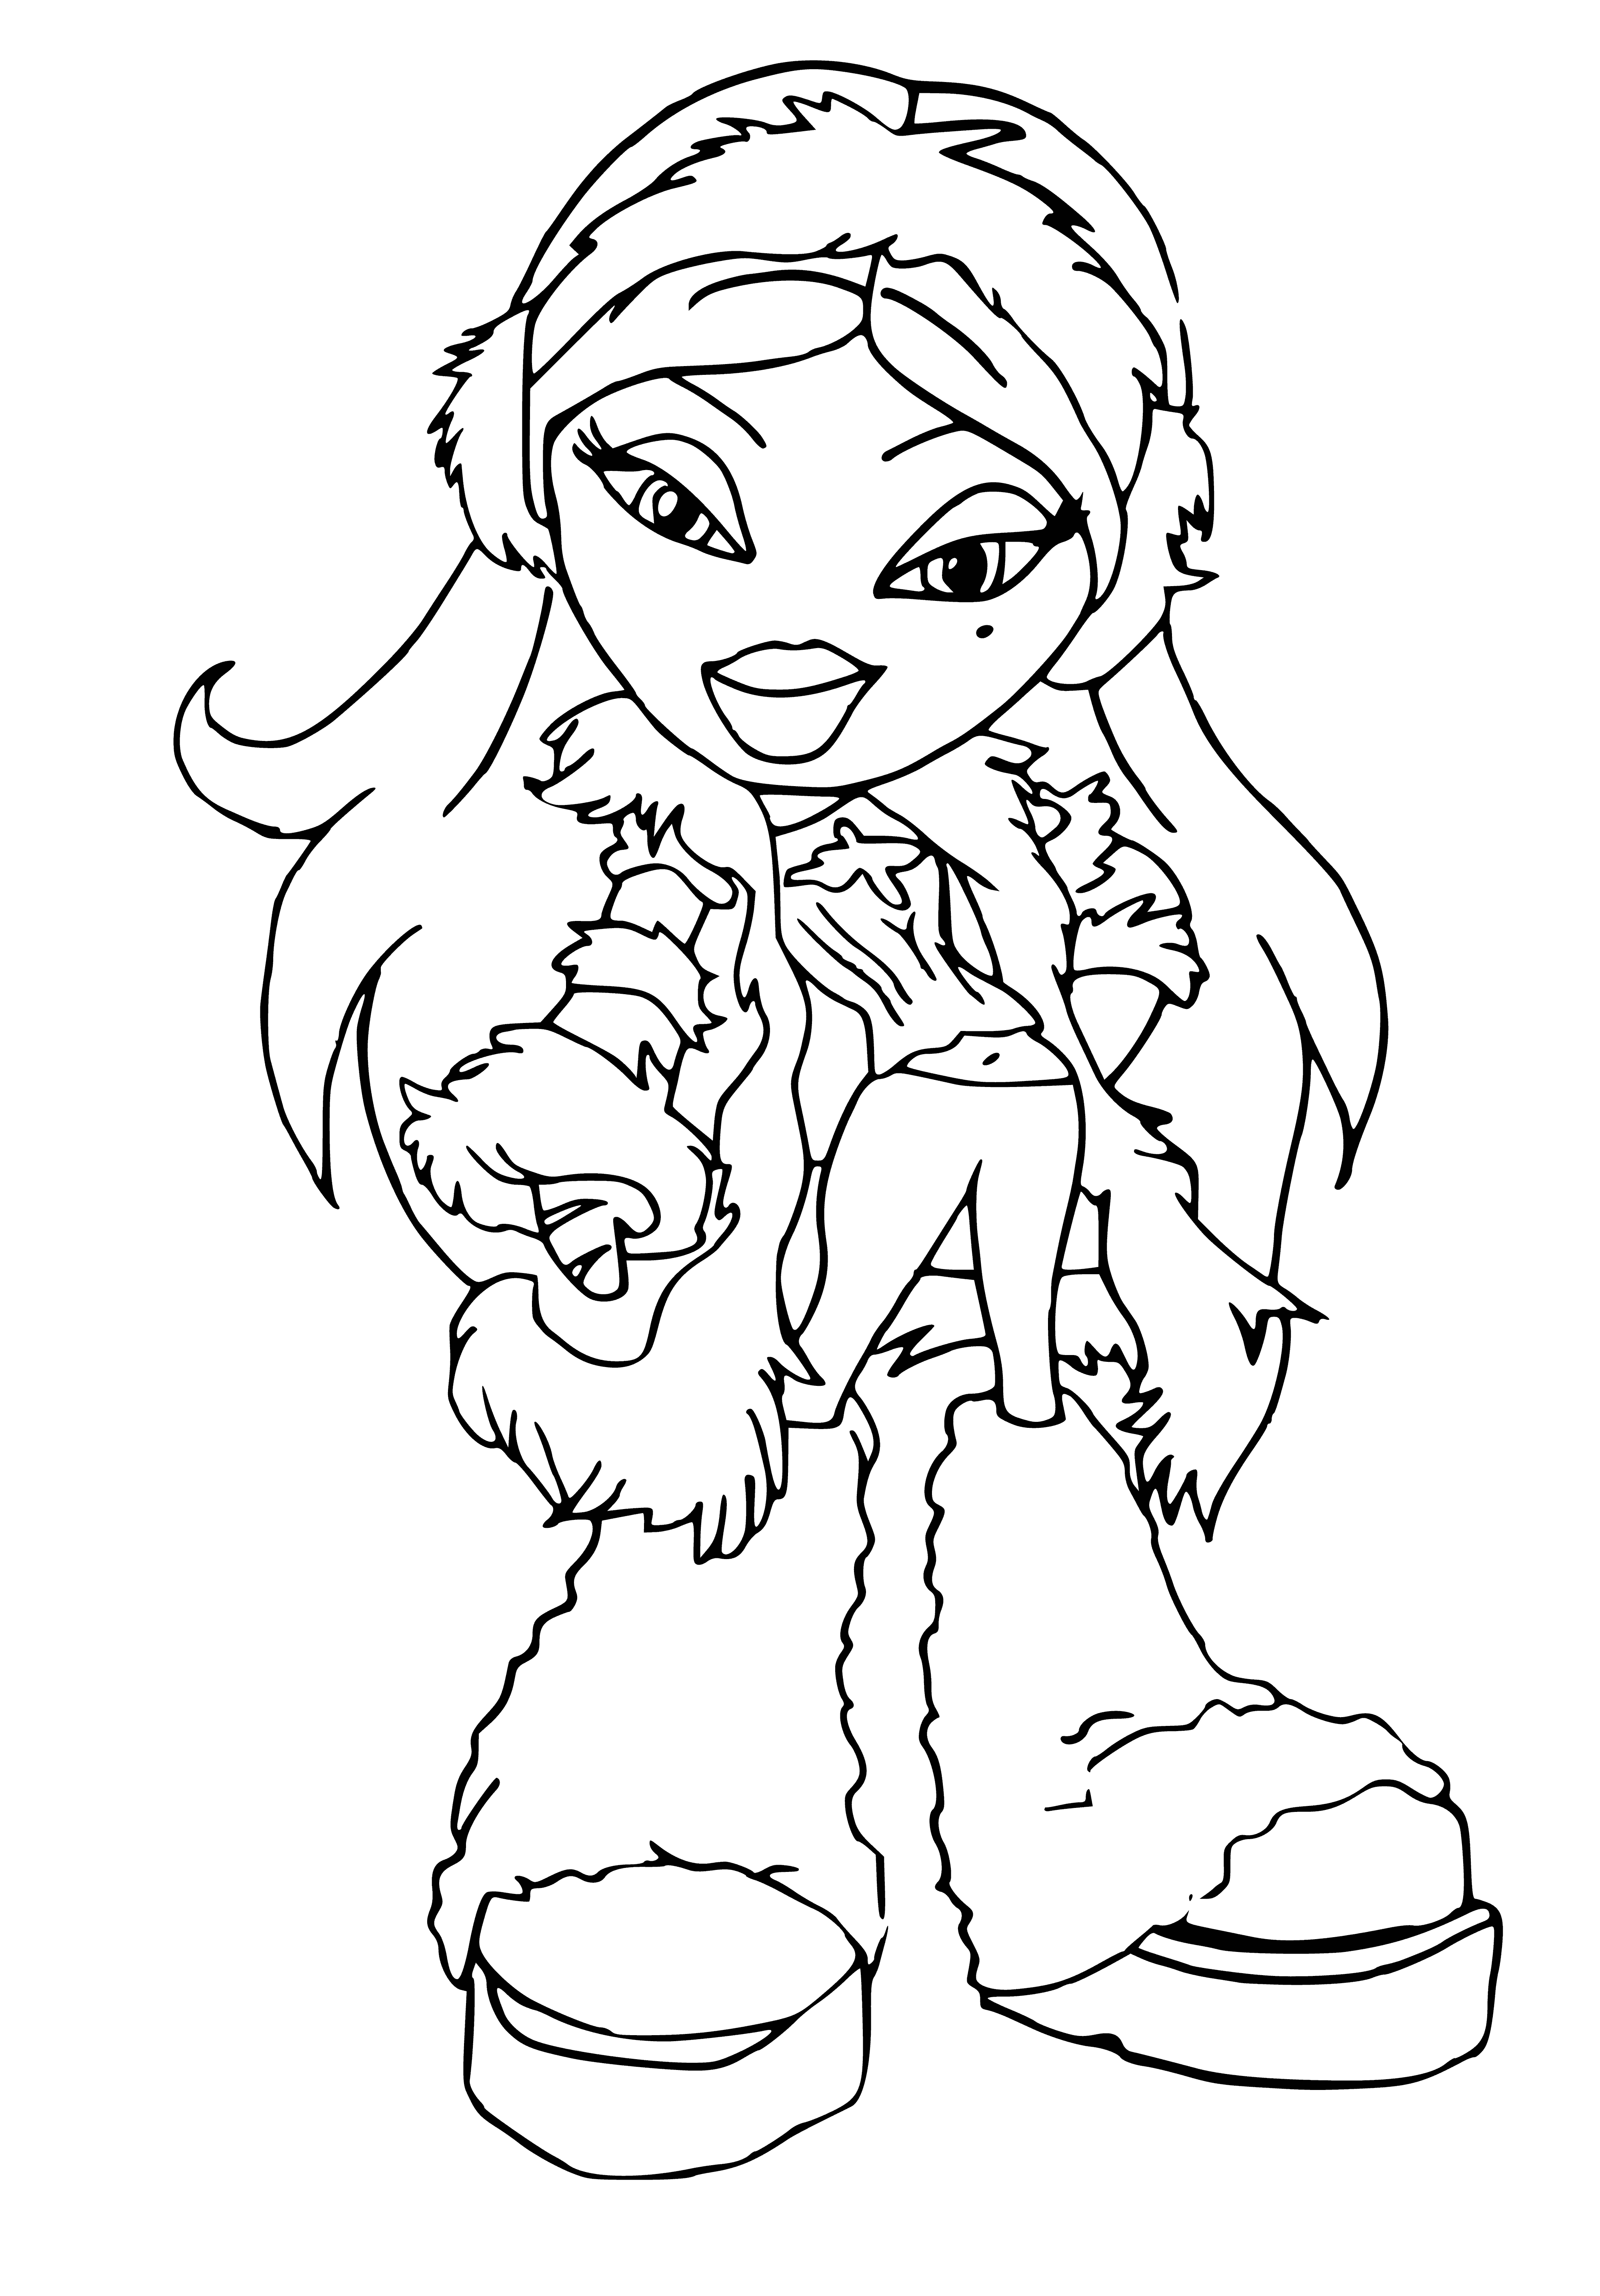 coloring page: 4 friends having winter fun, dressed for skiing & snowboarding, ready to hit the slopes & have a great time!